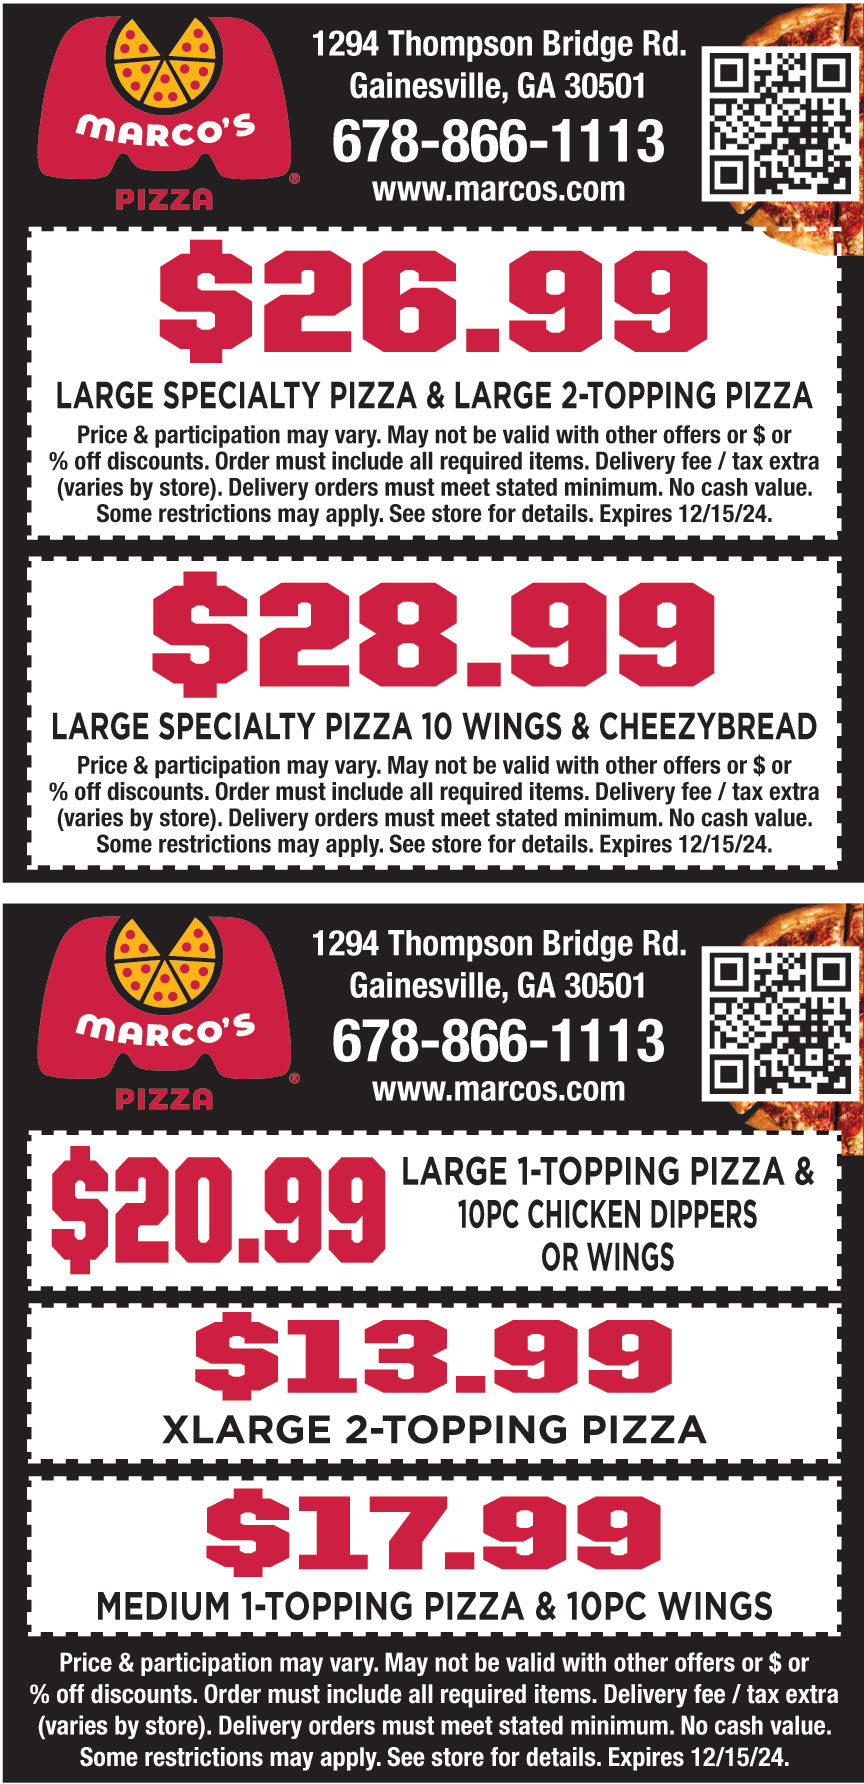 MARCOS PIZZA